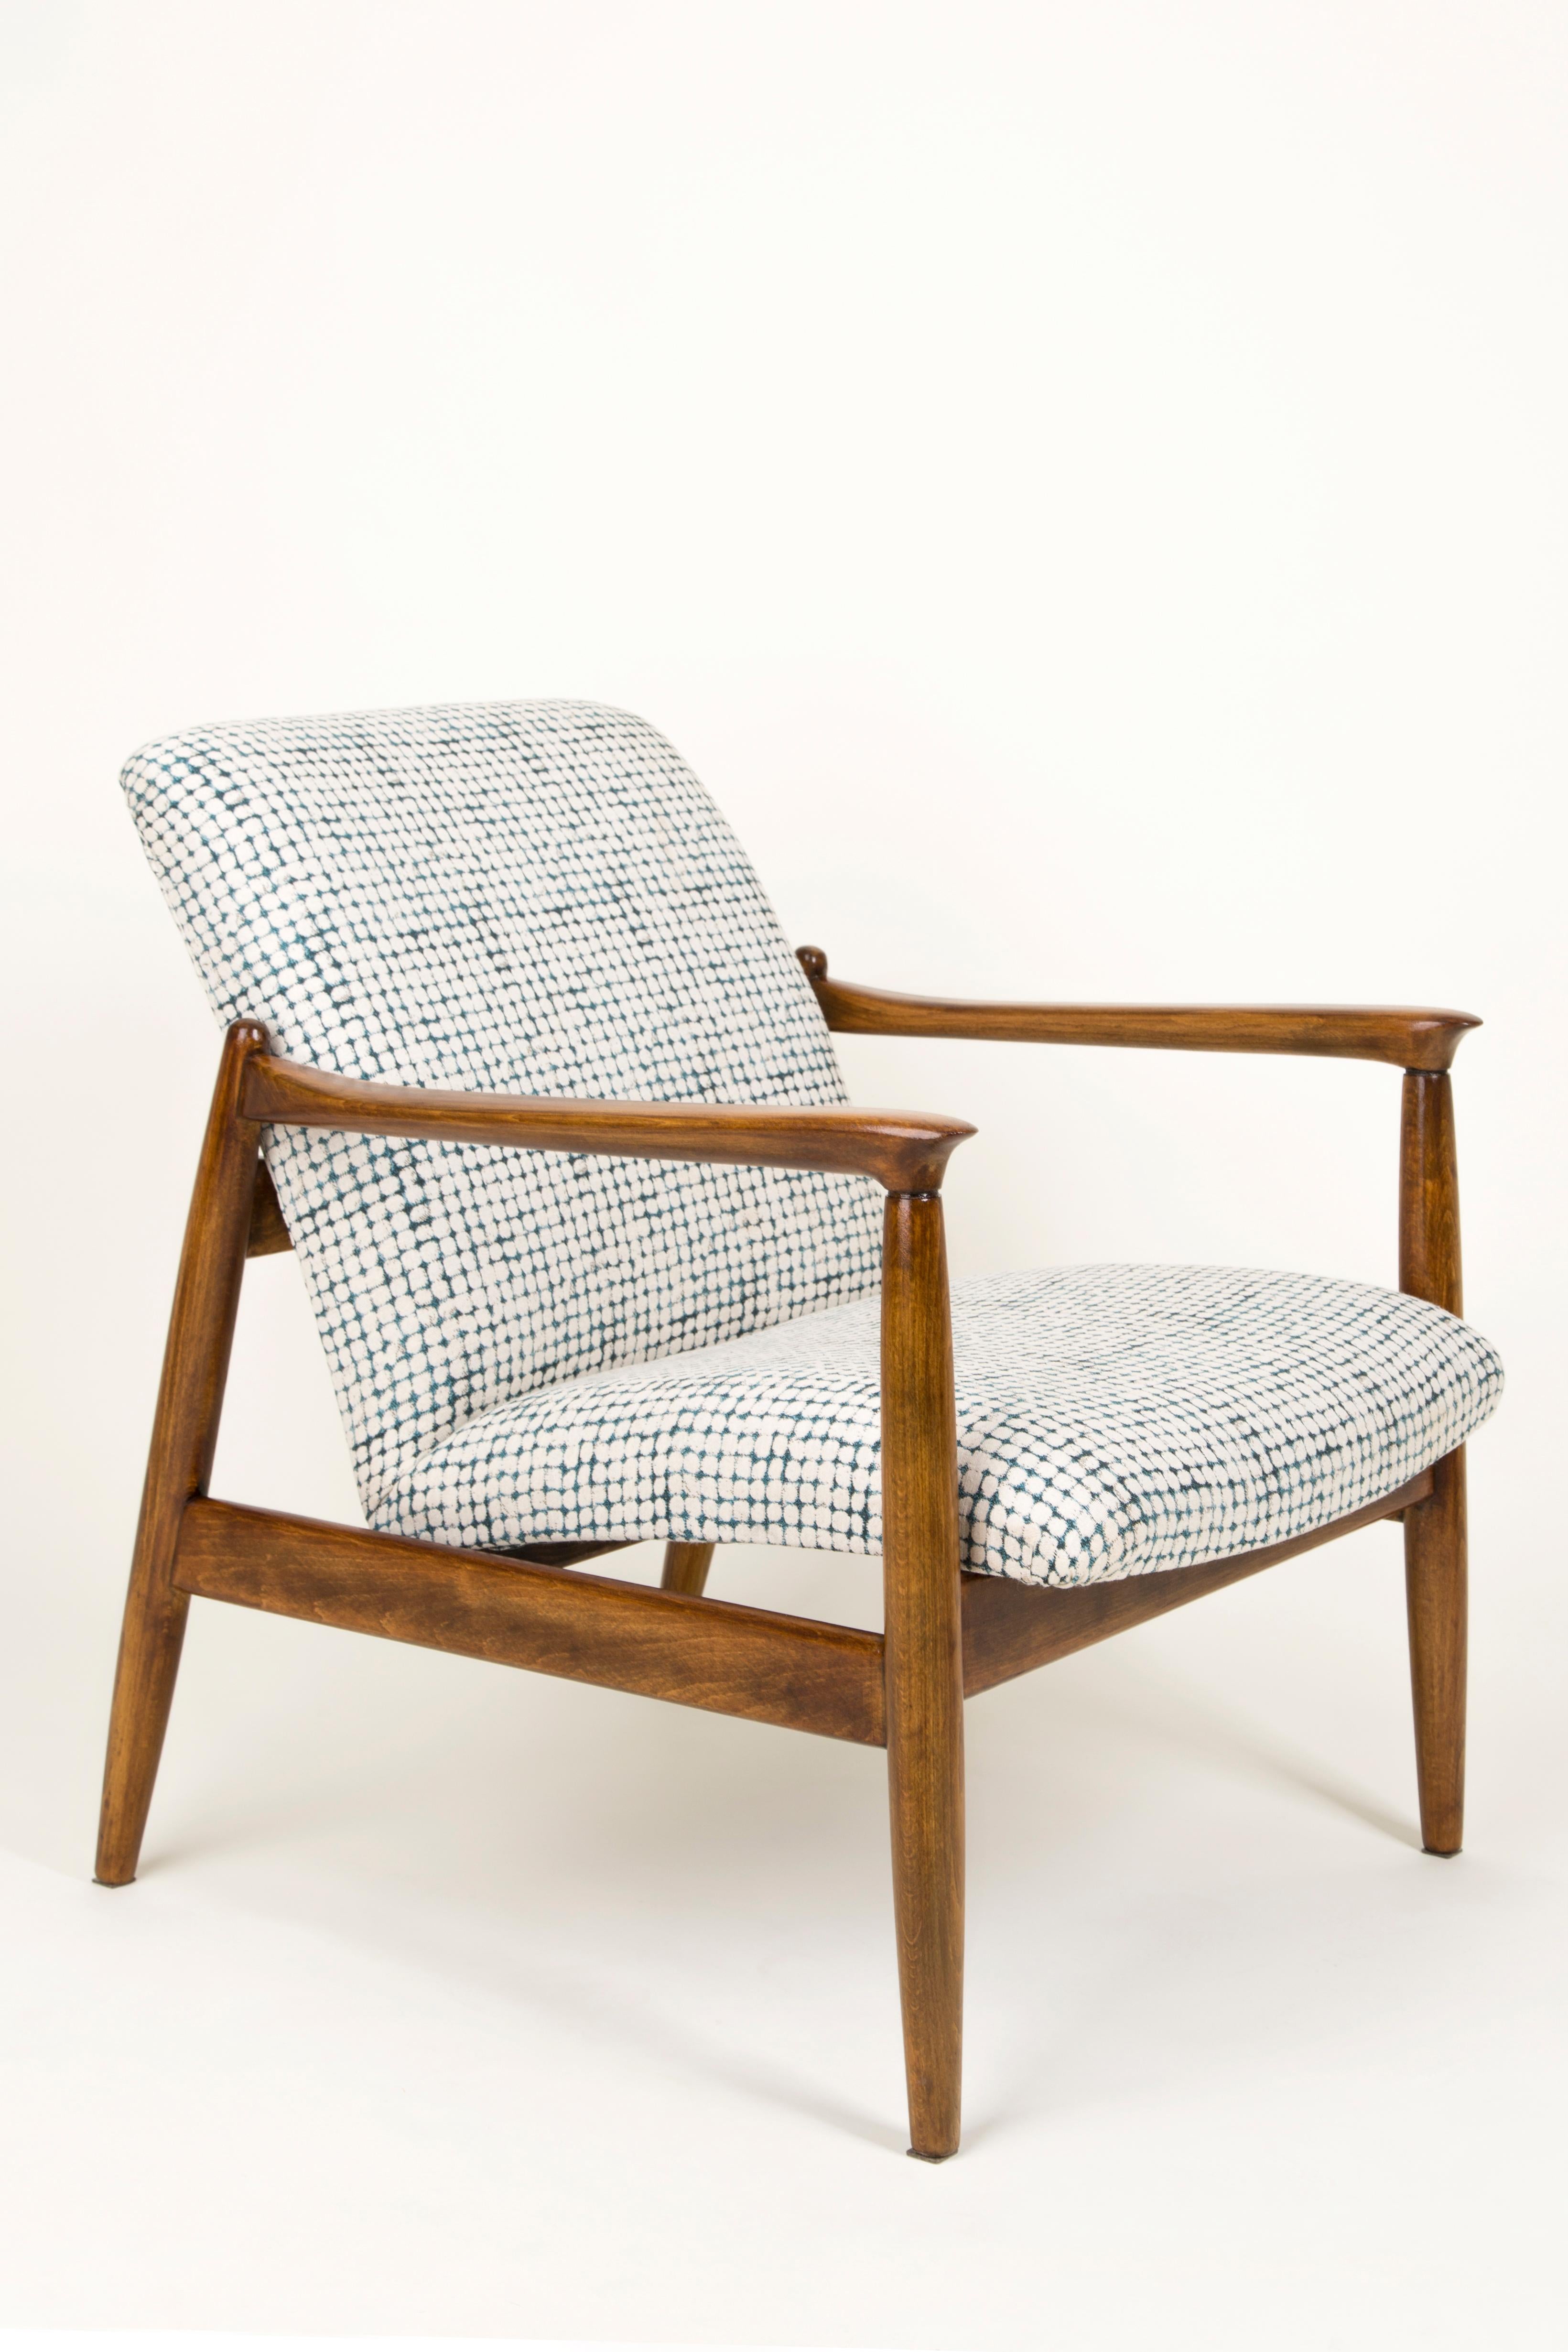 Mid Century White and Aqua Vintage Armchair and Stool, Edmund Homa, Europe, 1960s For Sale 1